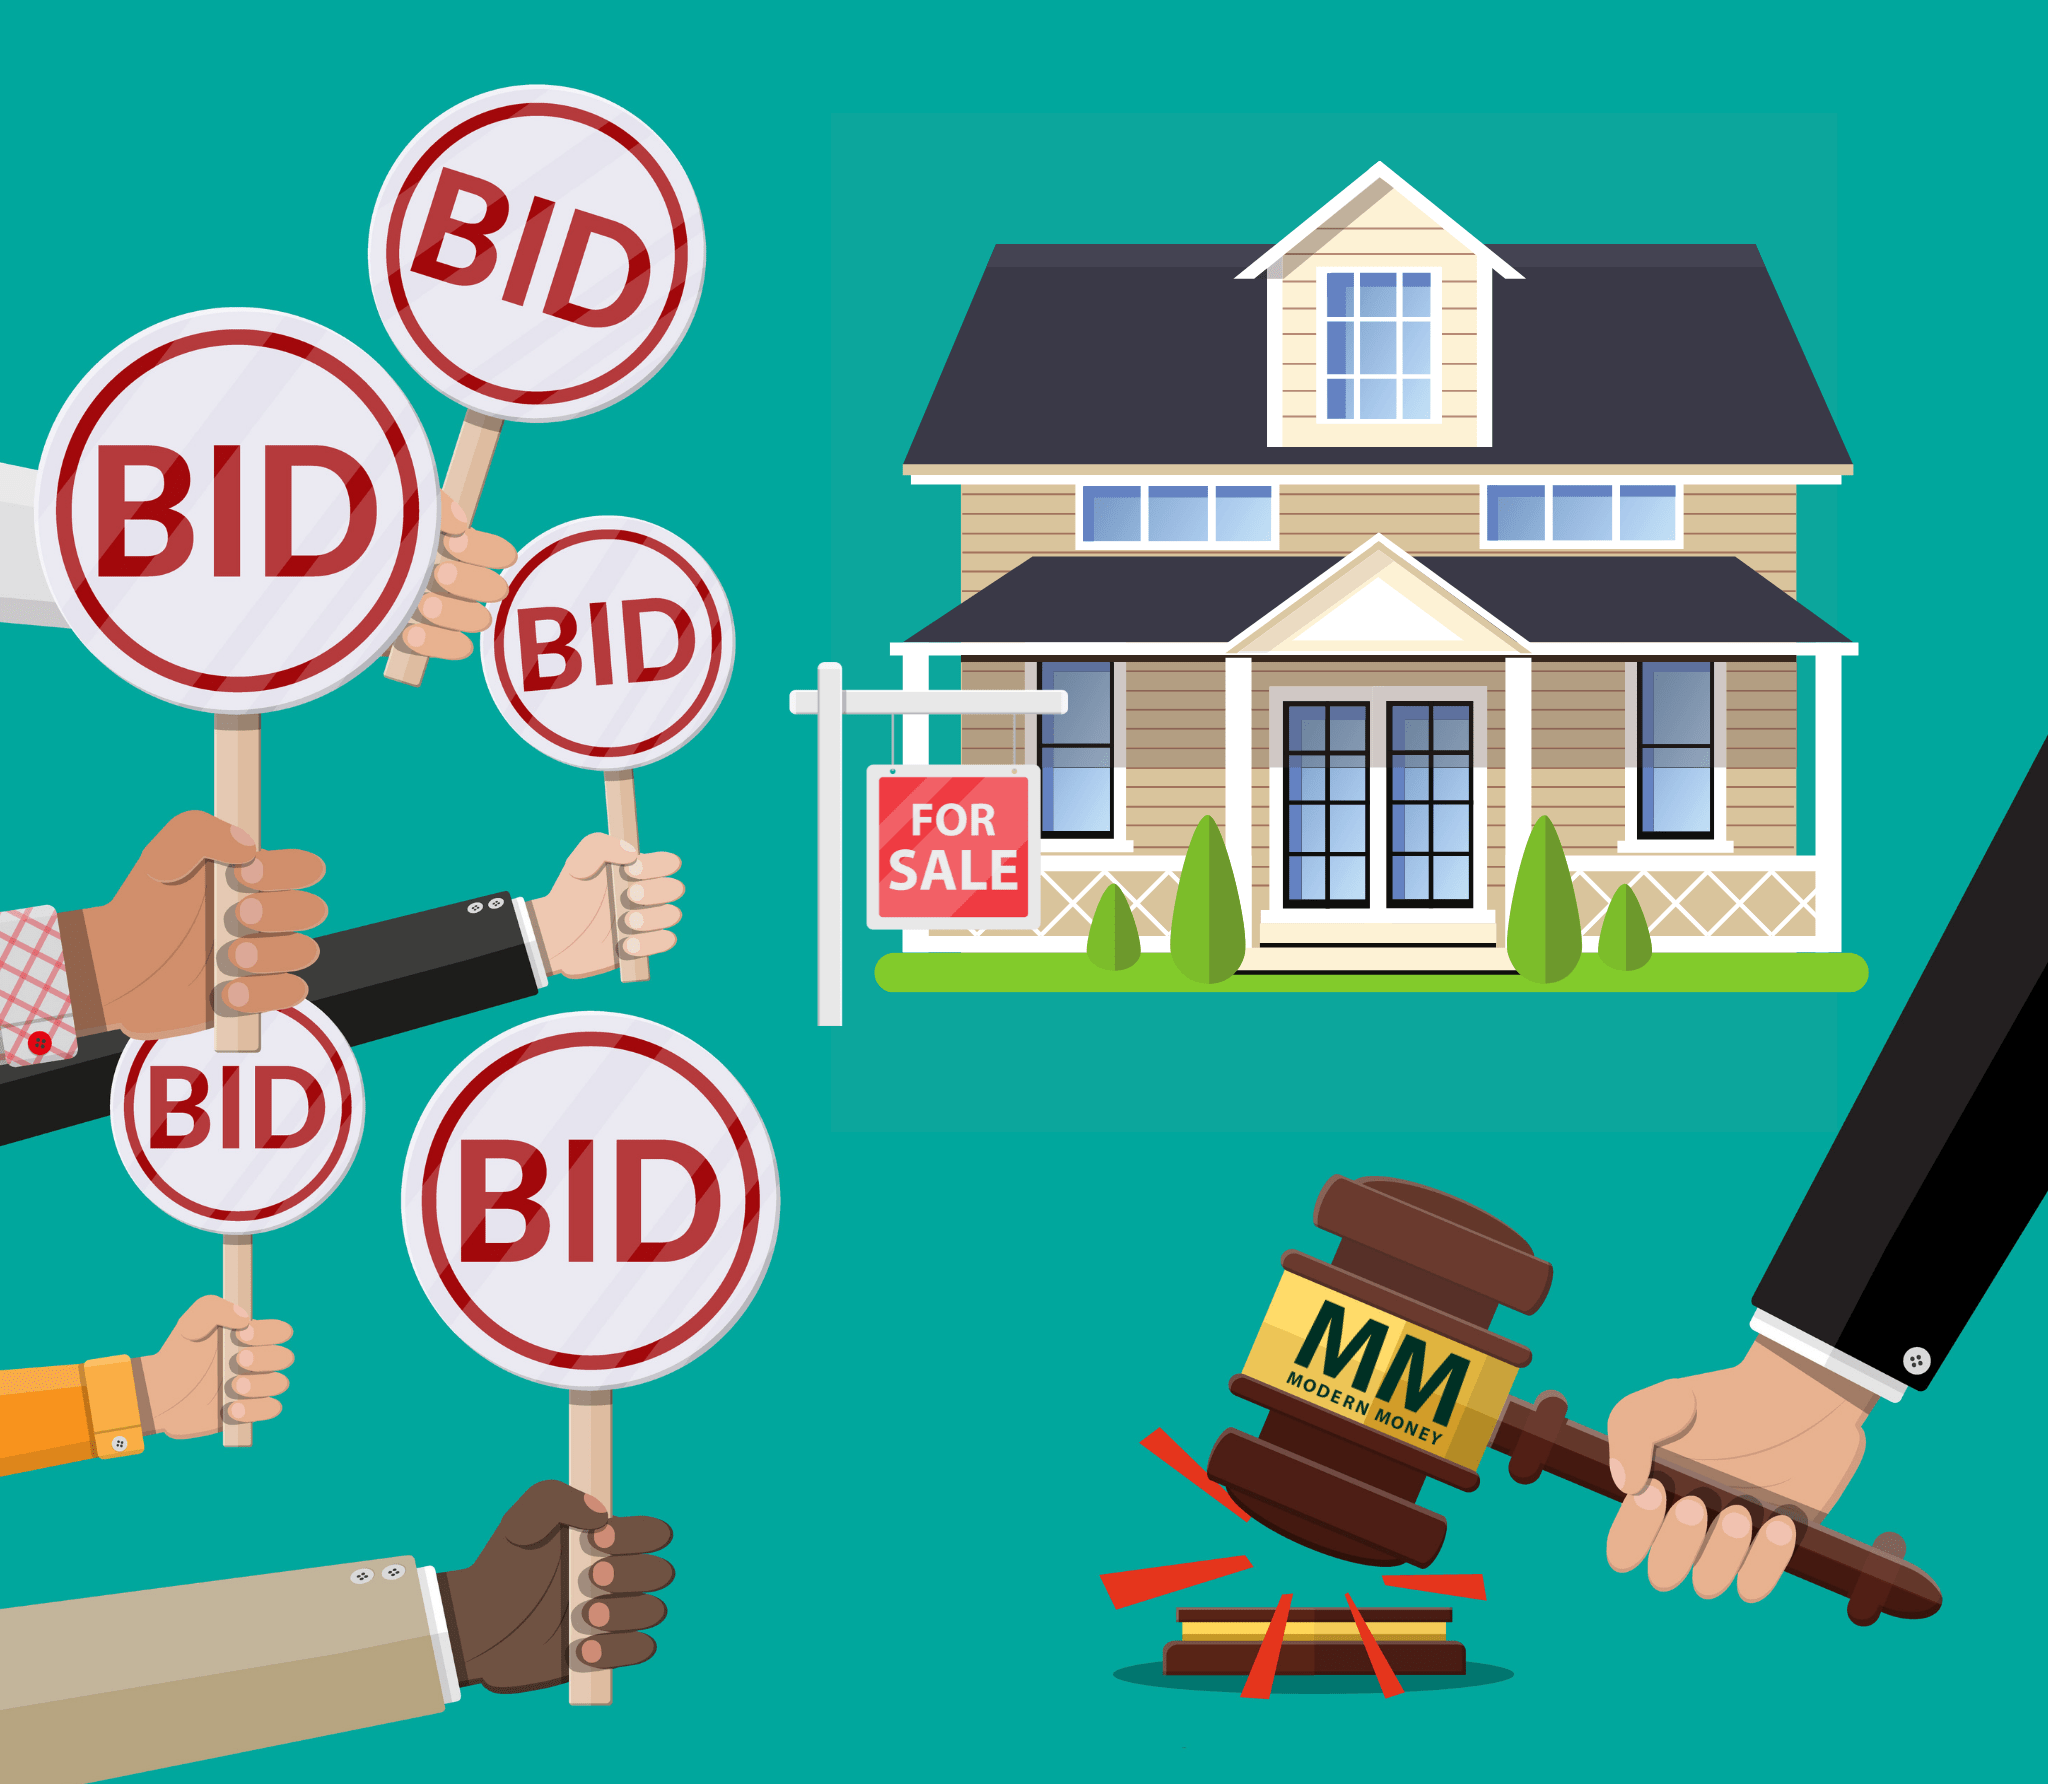 How to Purchase a Home in This Changing Market